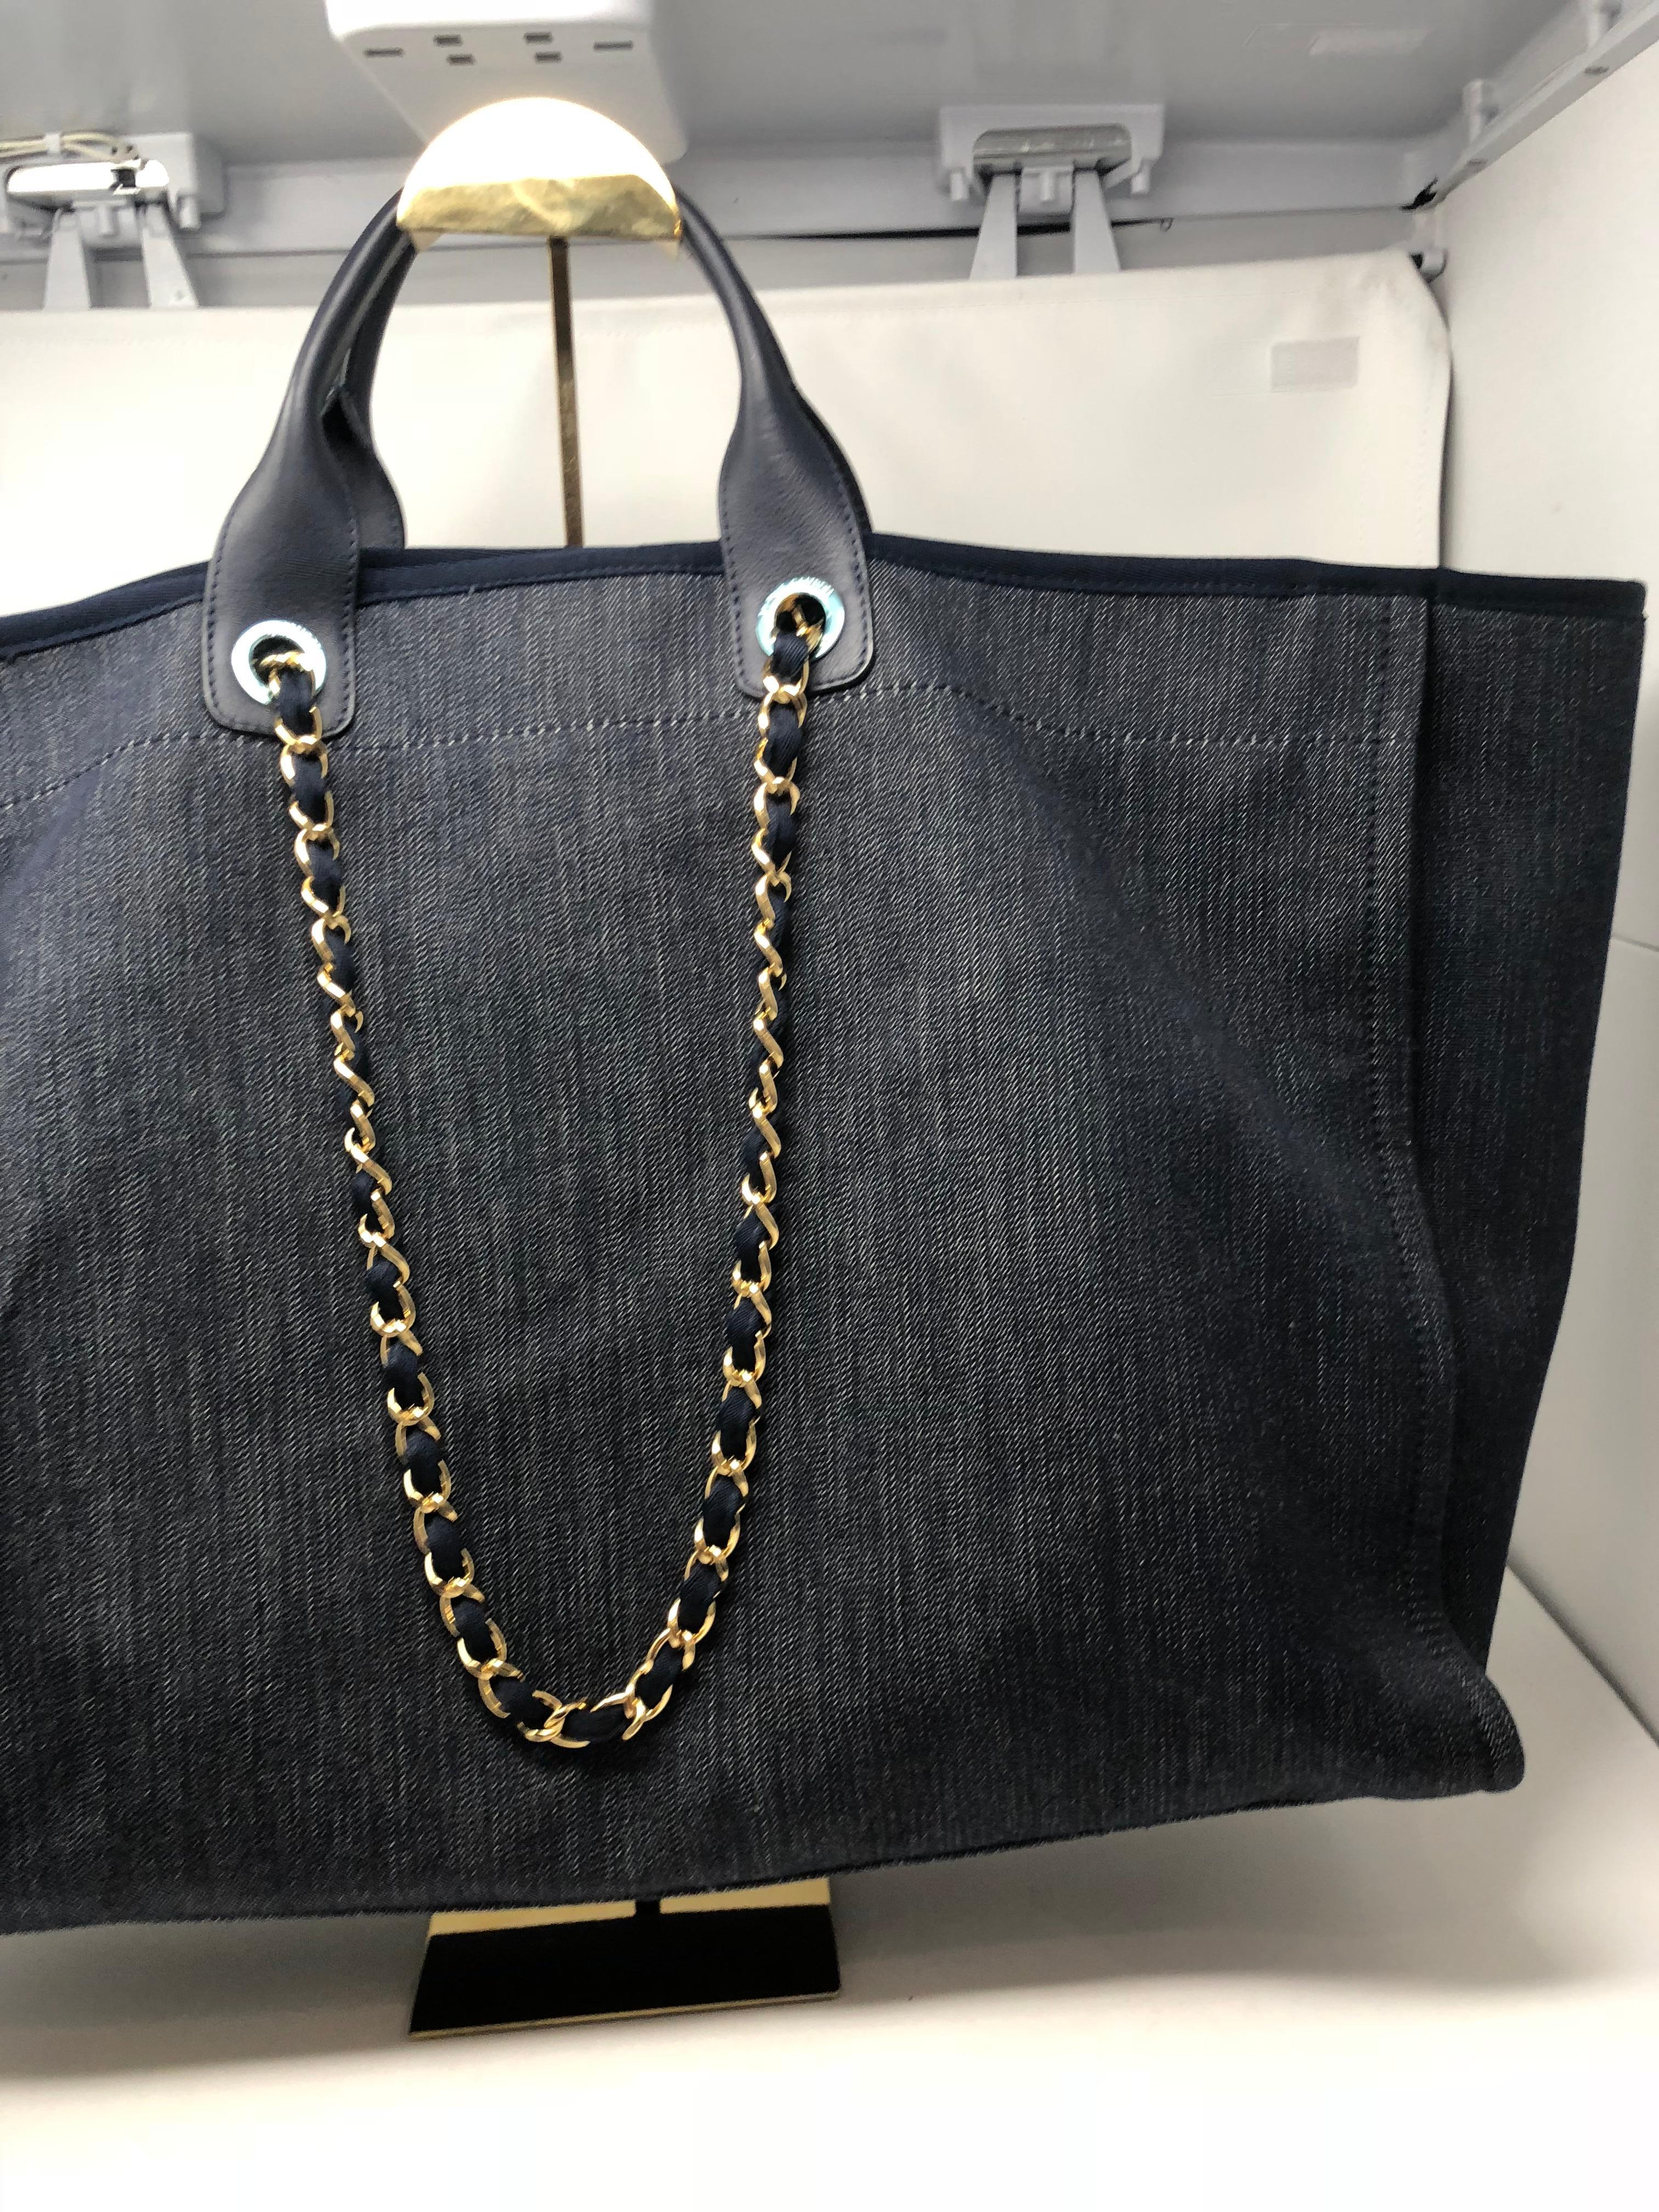 Chanel Deauville Tote XL Bag 5